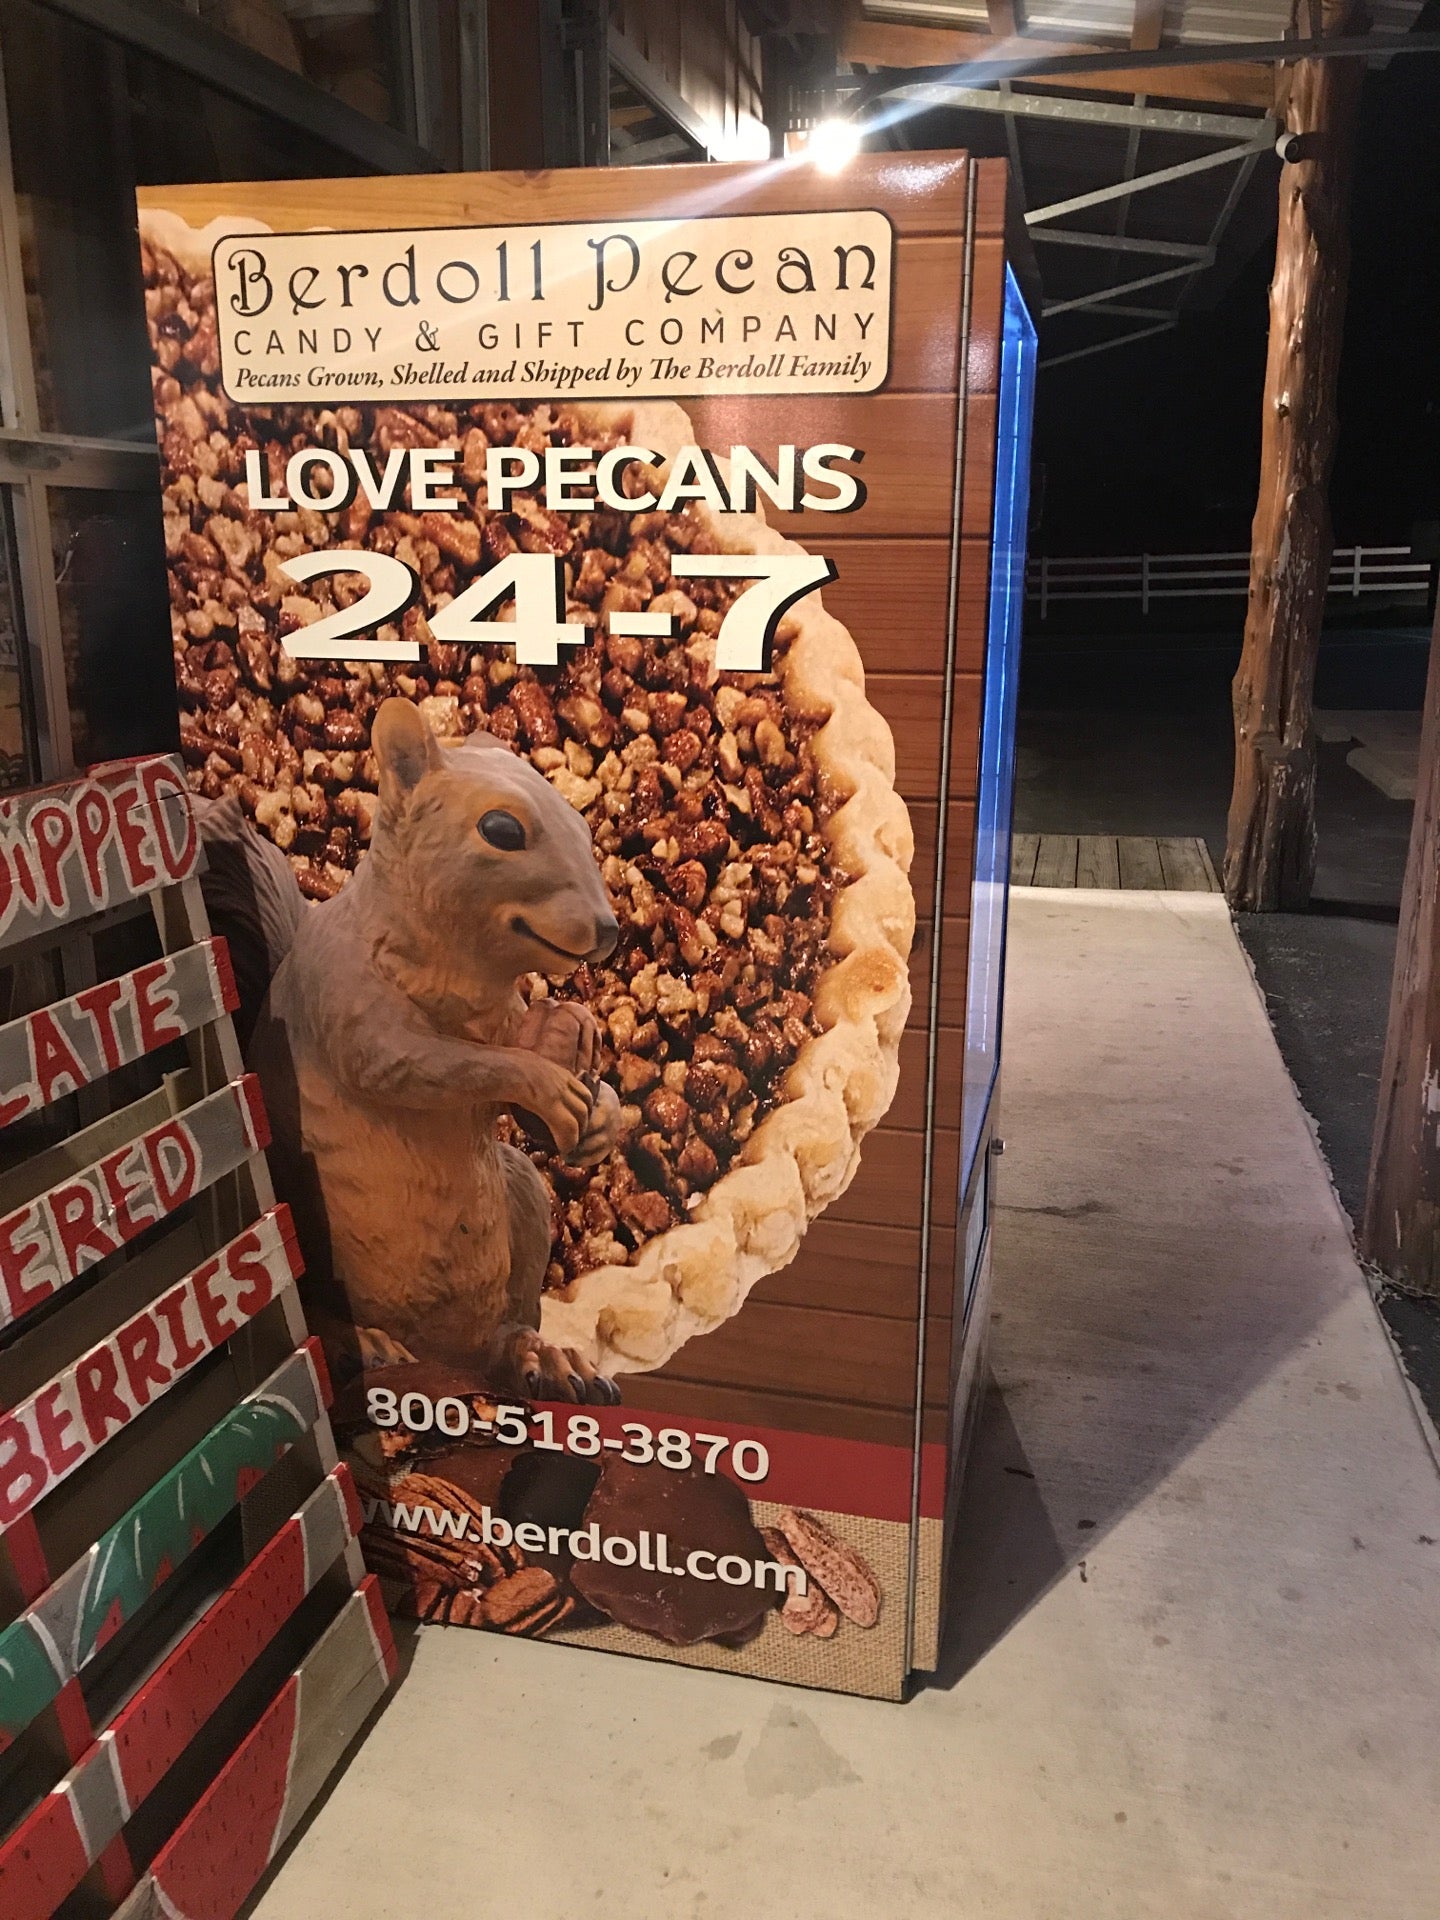 Retail Location  Berdoll Pecan Candy And Gift Company